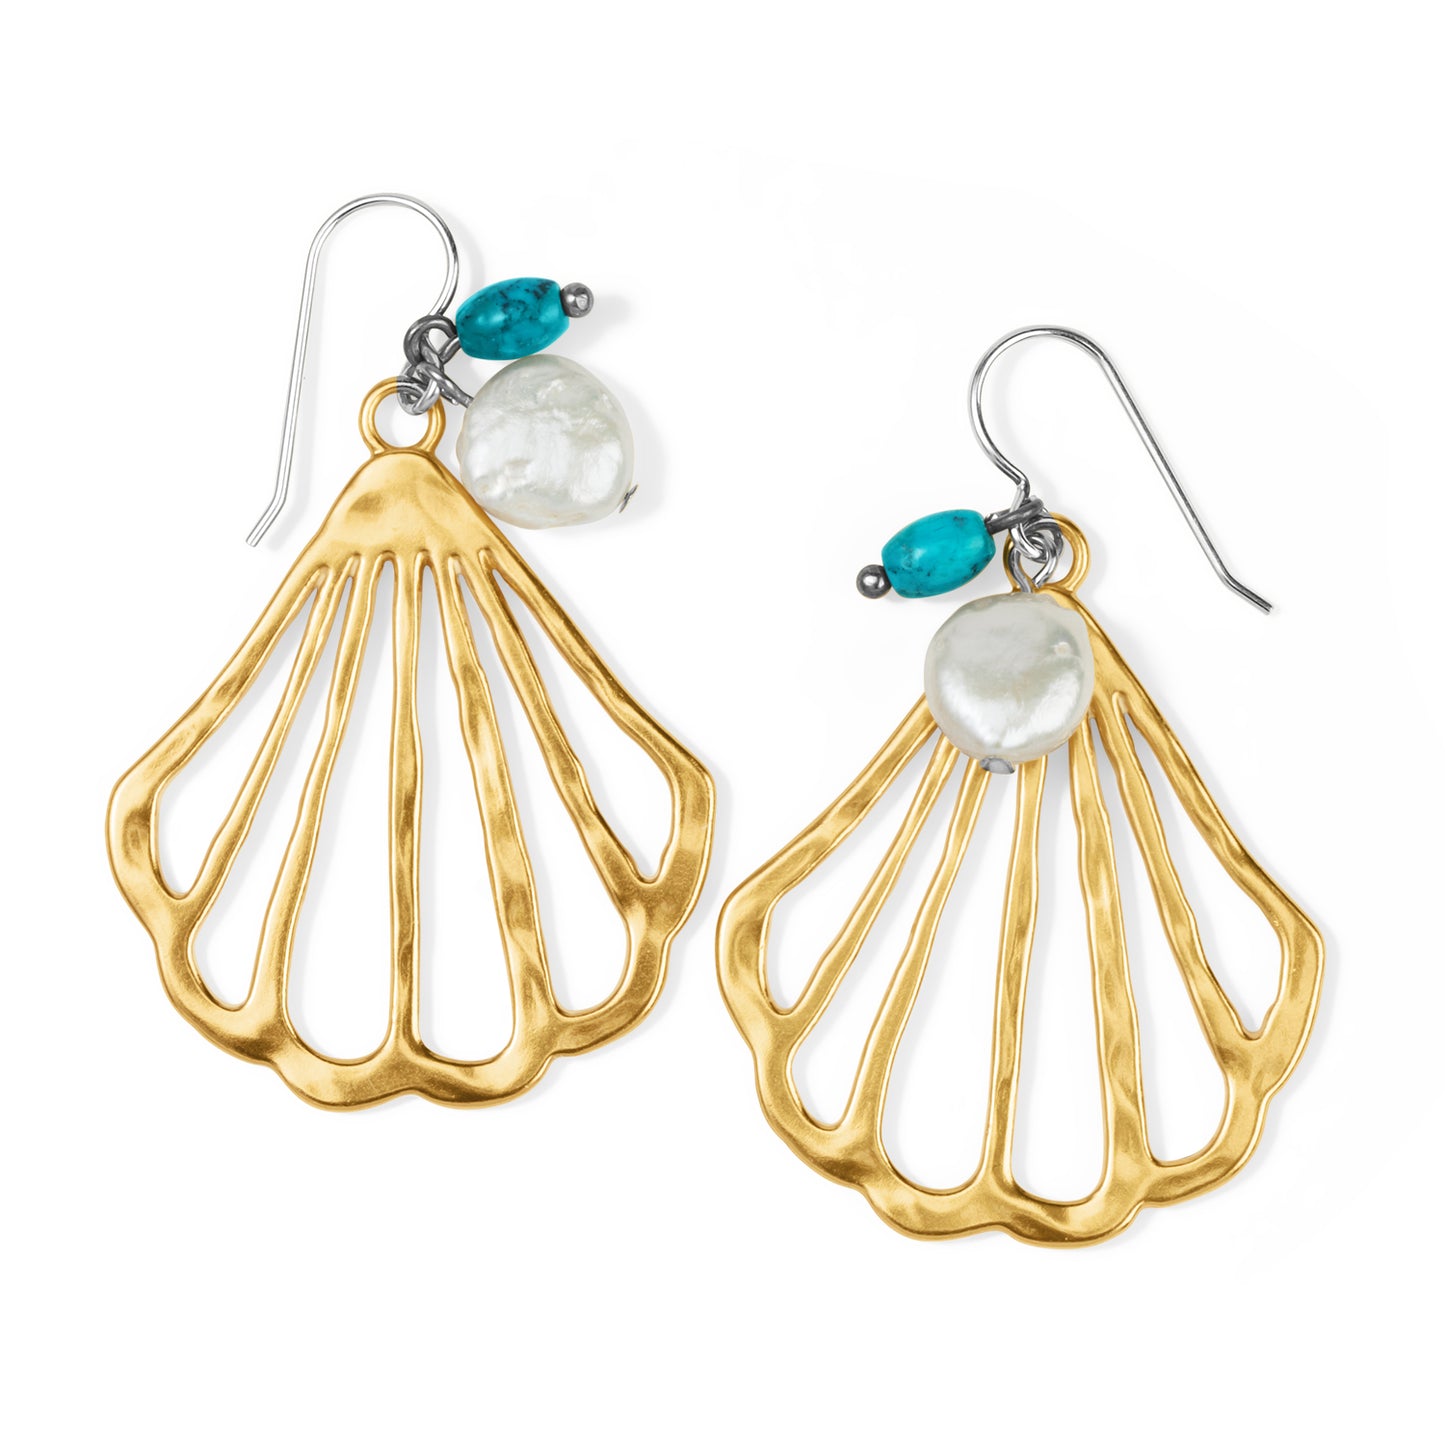 Calypso Shell French Wire Earrings by Brighton features sculptural shell design in matte gold finish with pearl and turquoise magnesite beads. Shop at The Painted Cottage in Edgewater, MD.